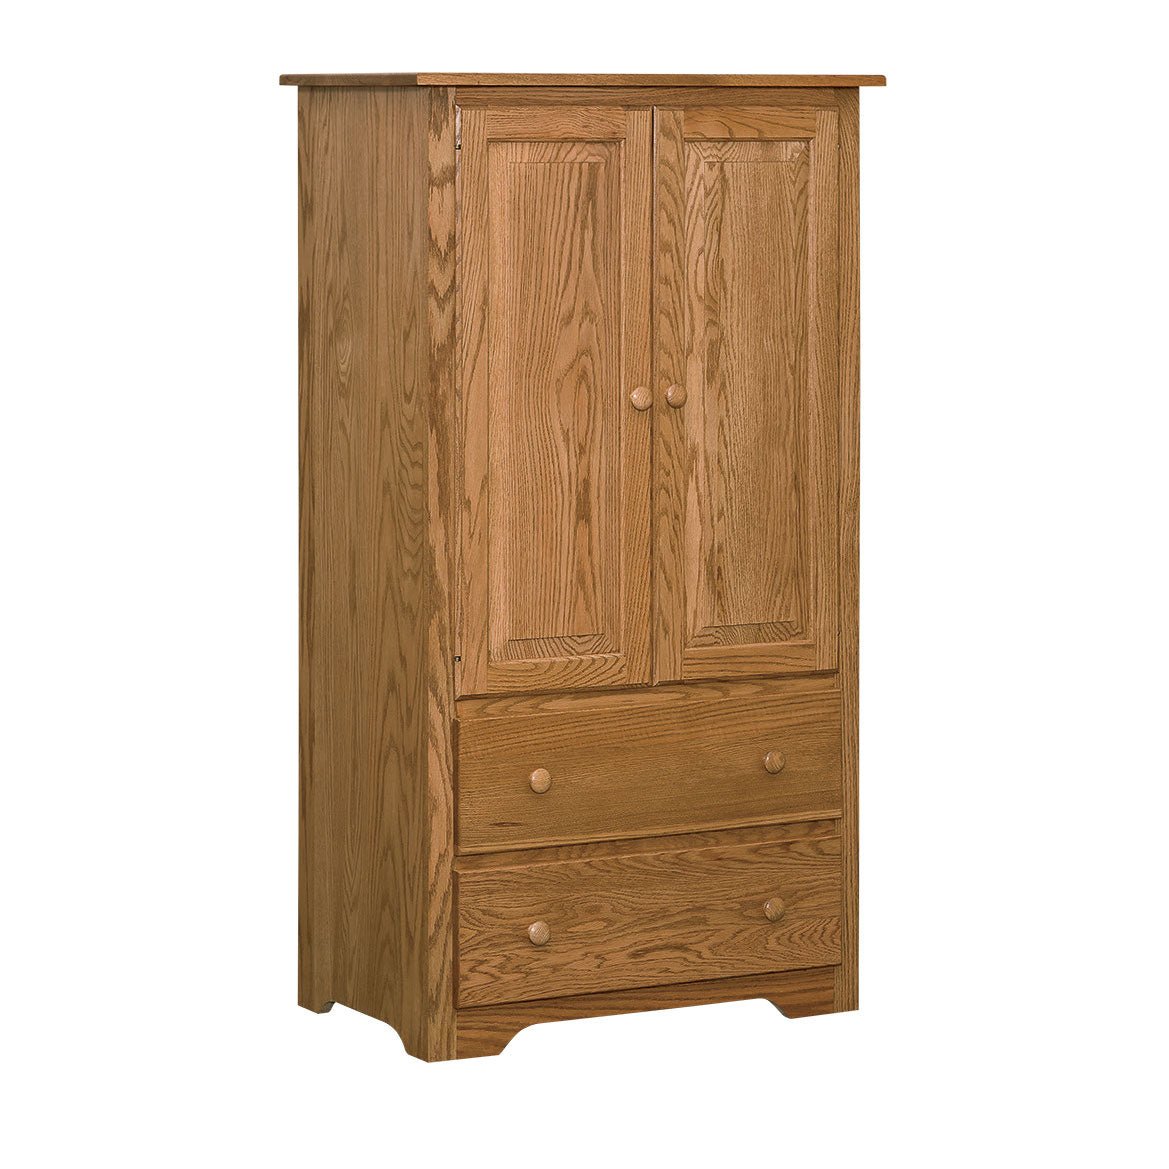 Eden Amish Shaker Armoire - snyders.furniture